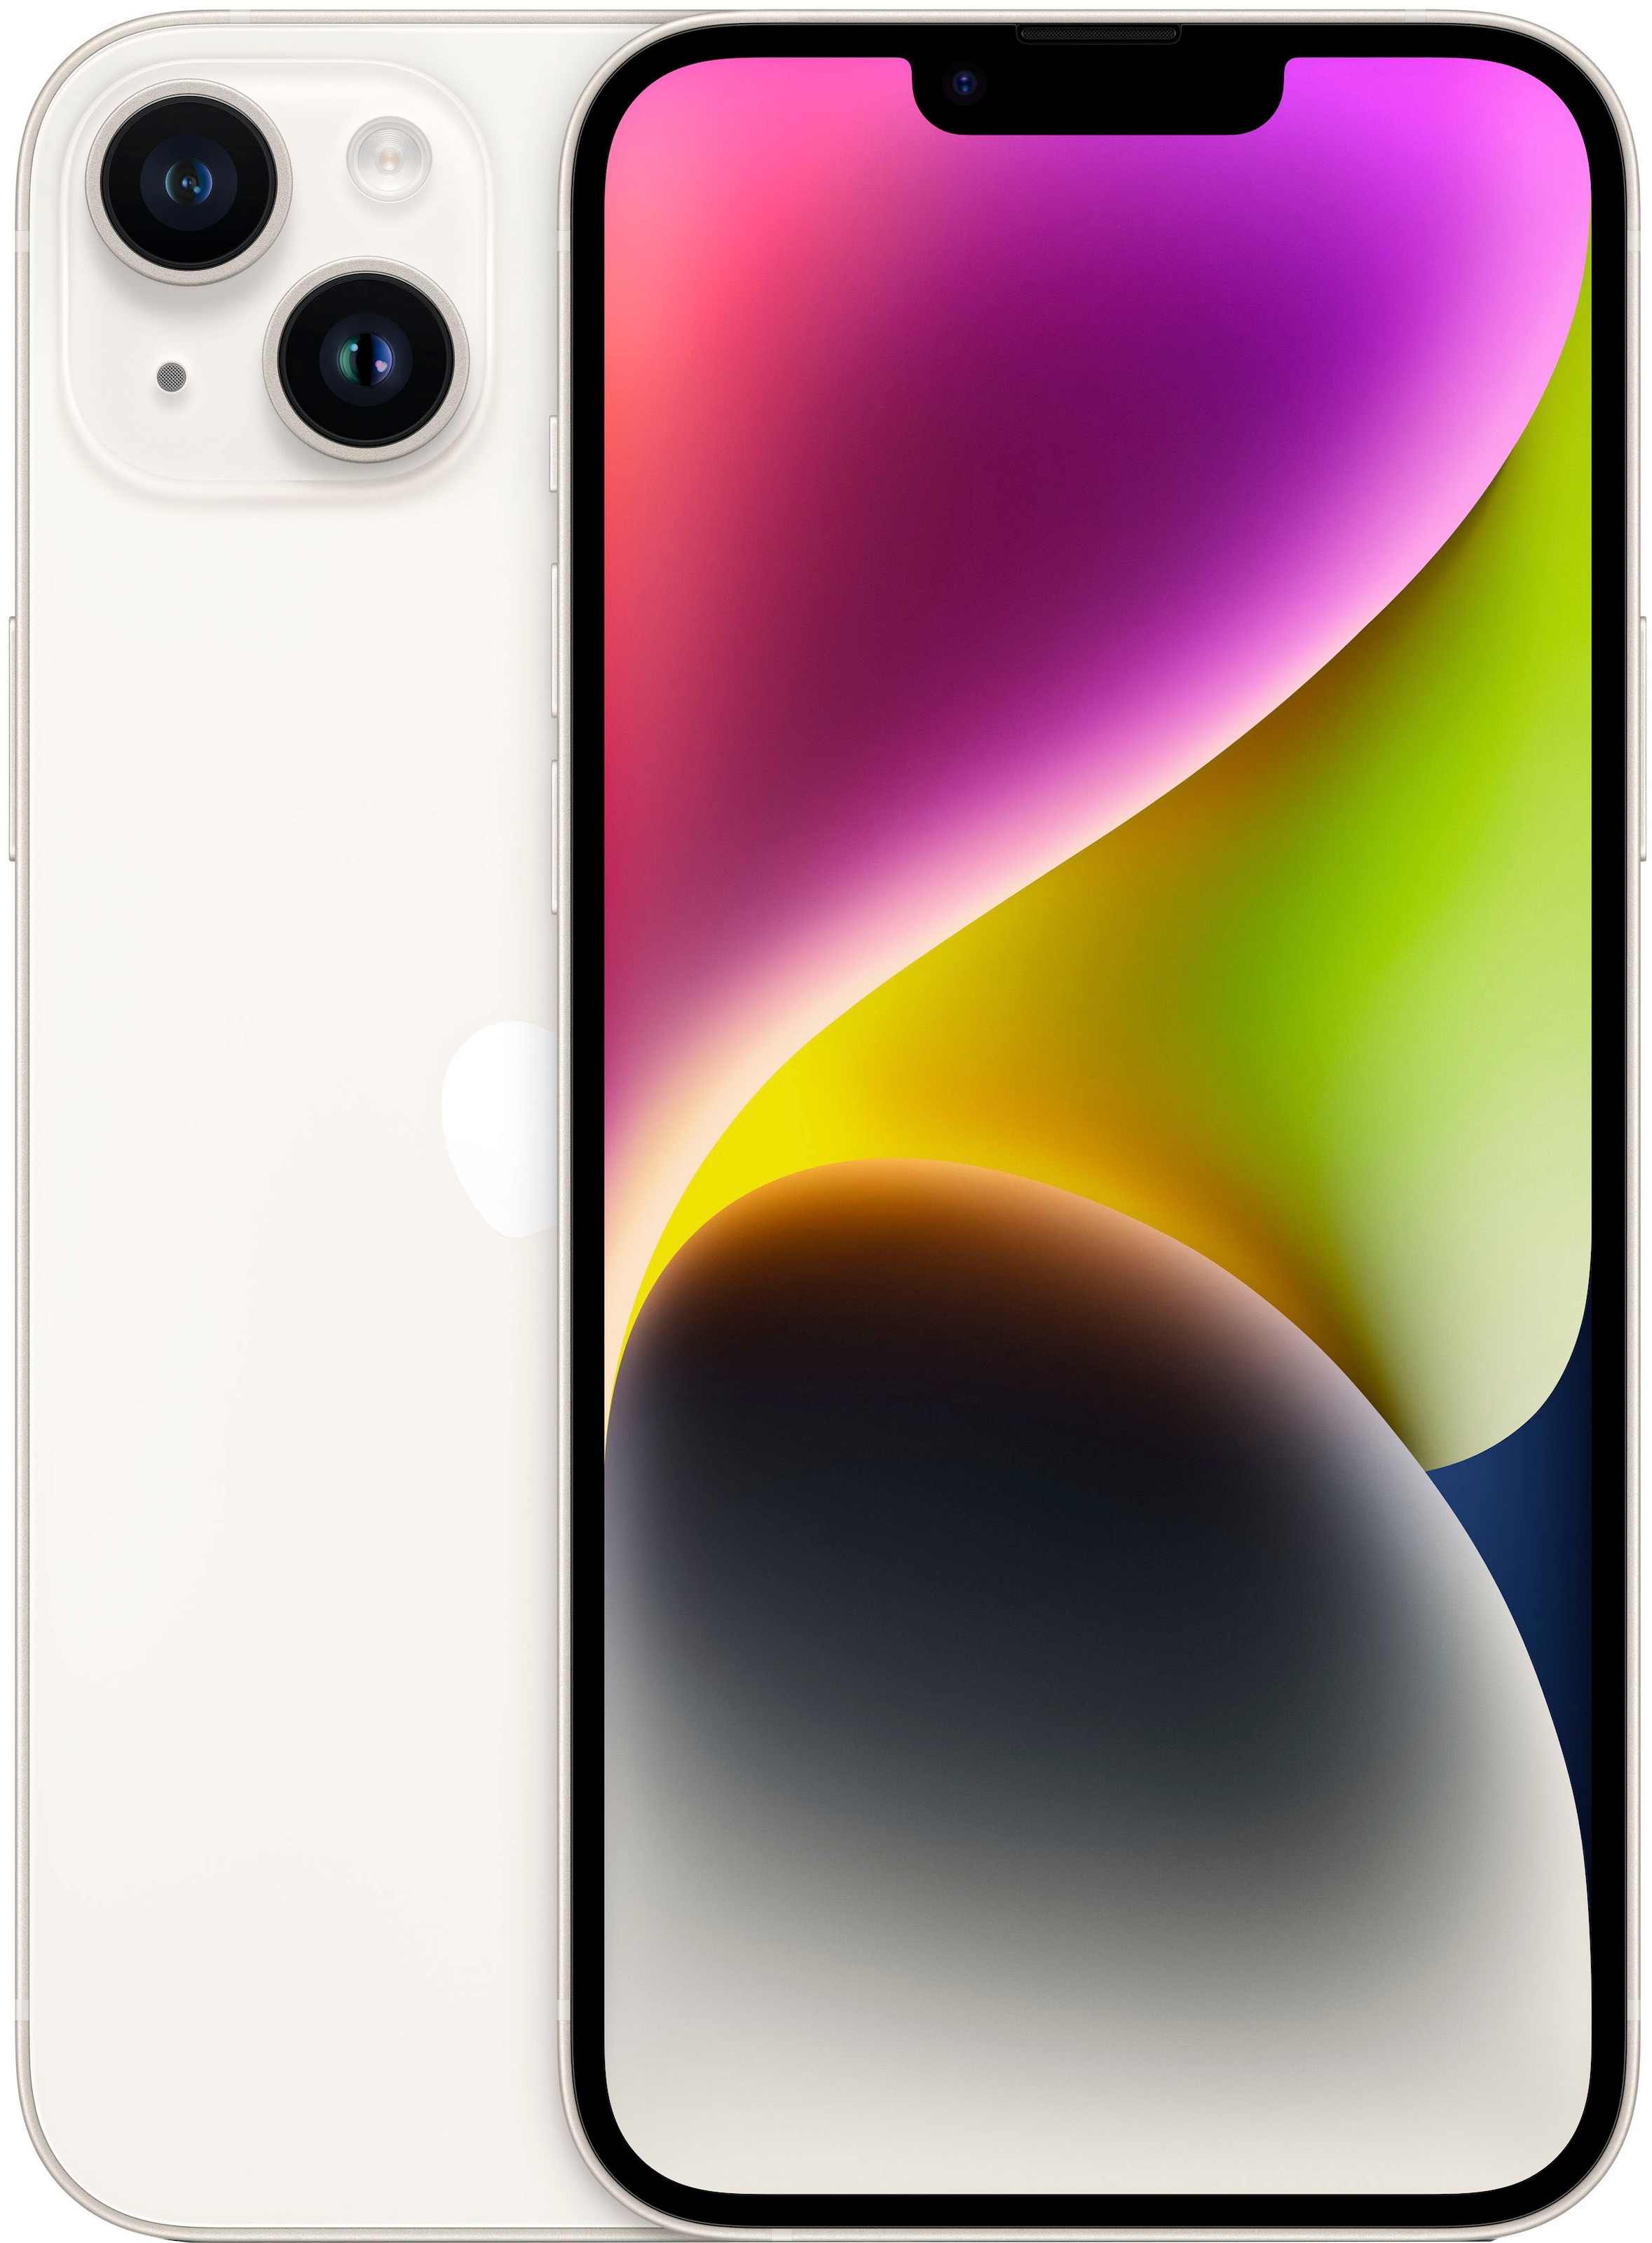 iPhone 13 Pro Max 256GB Alpine Green - From €879,00 - Swappie